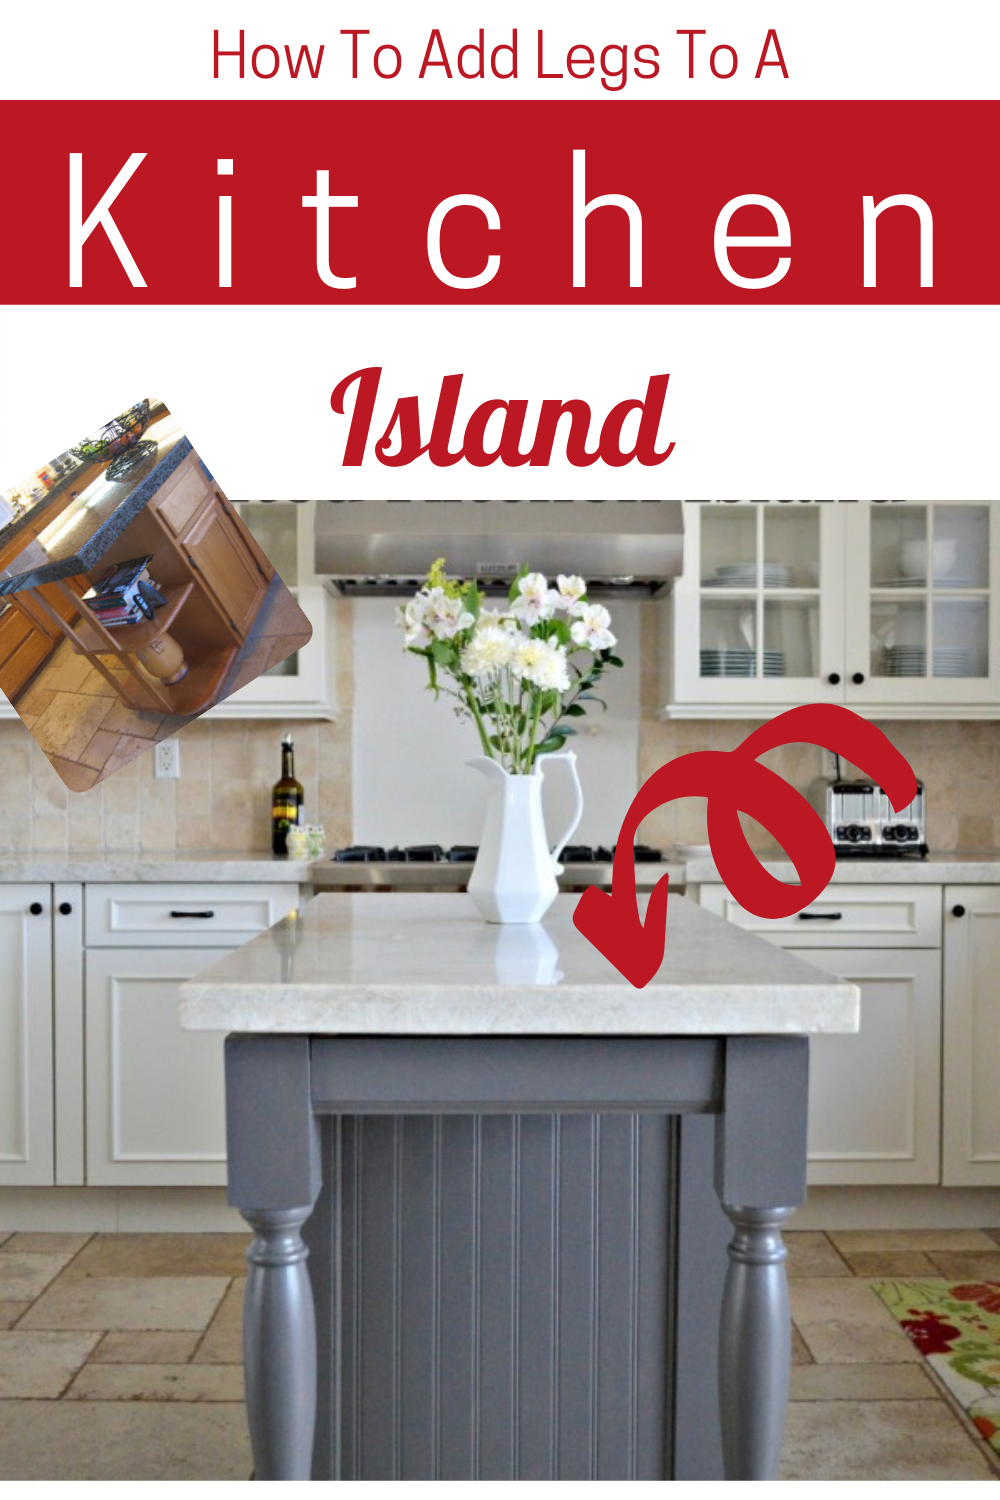 How To Add Legs Your Kitchen Island, Countertop Support Legs